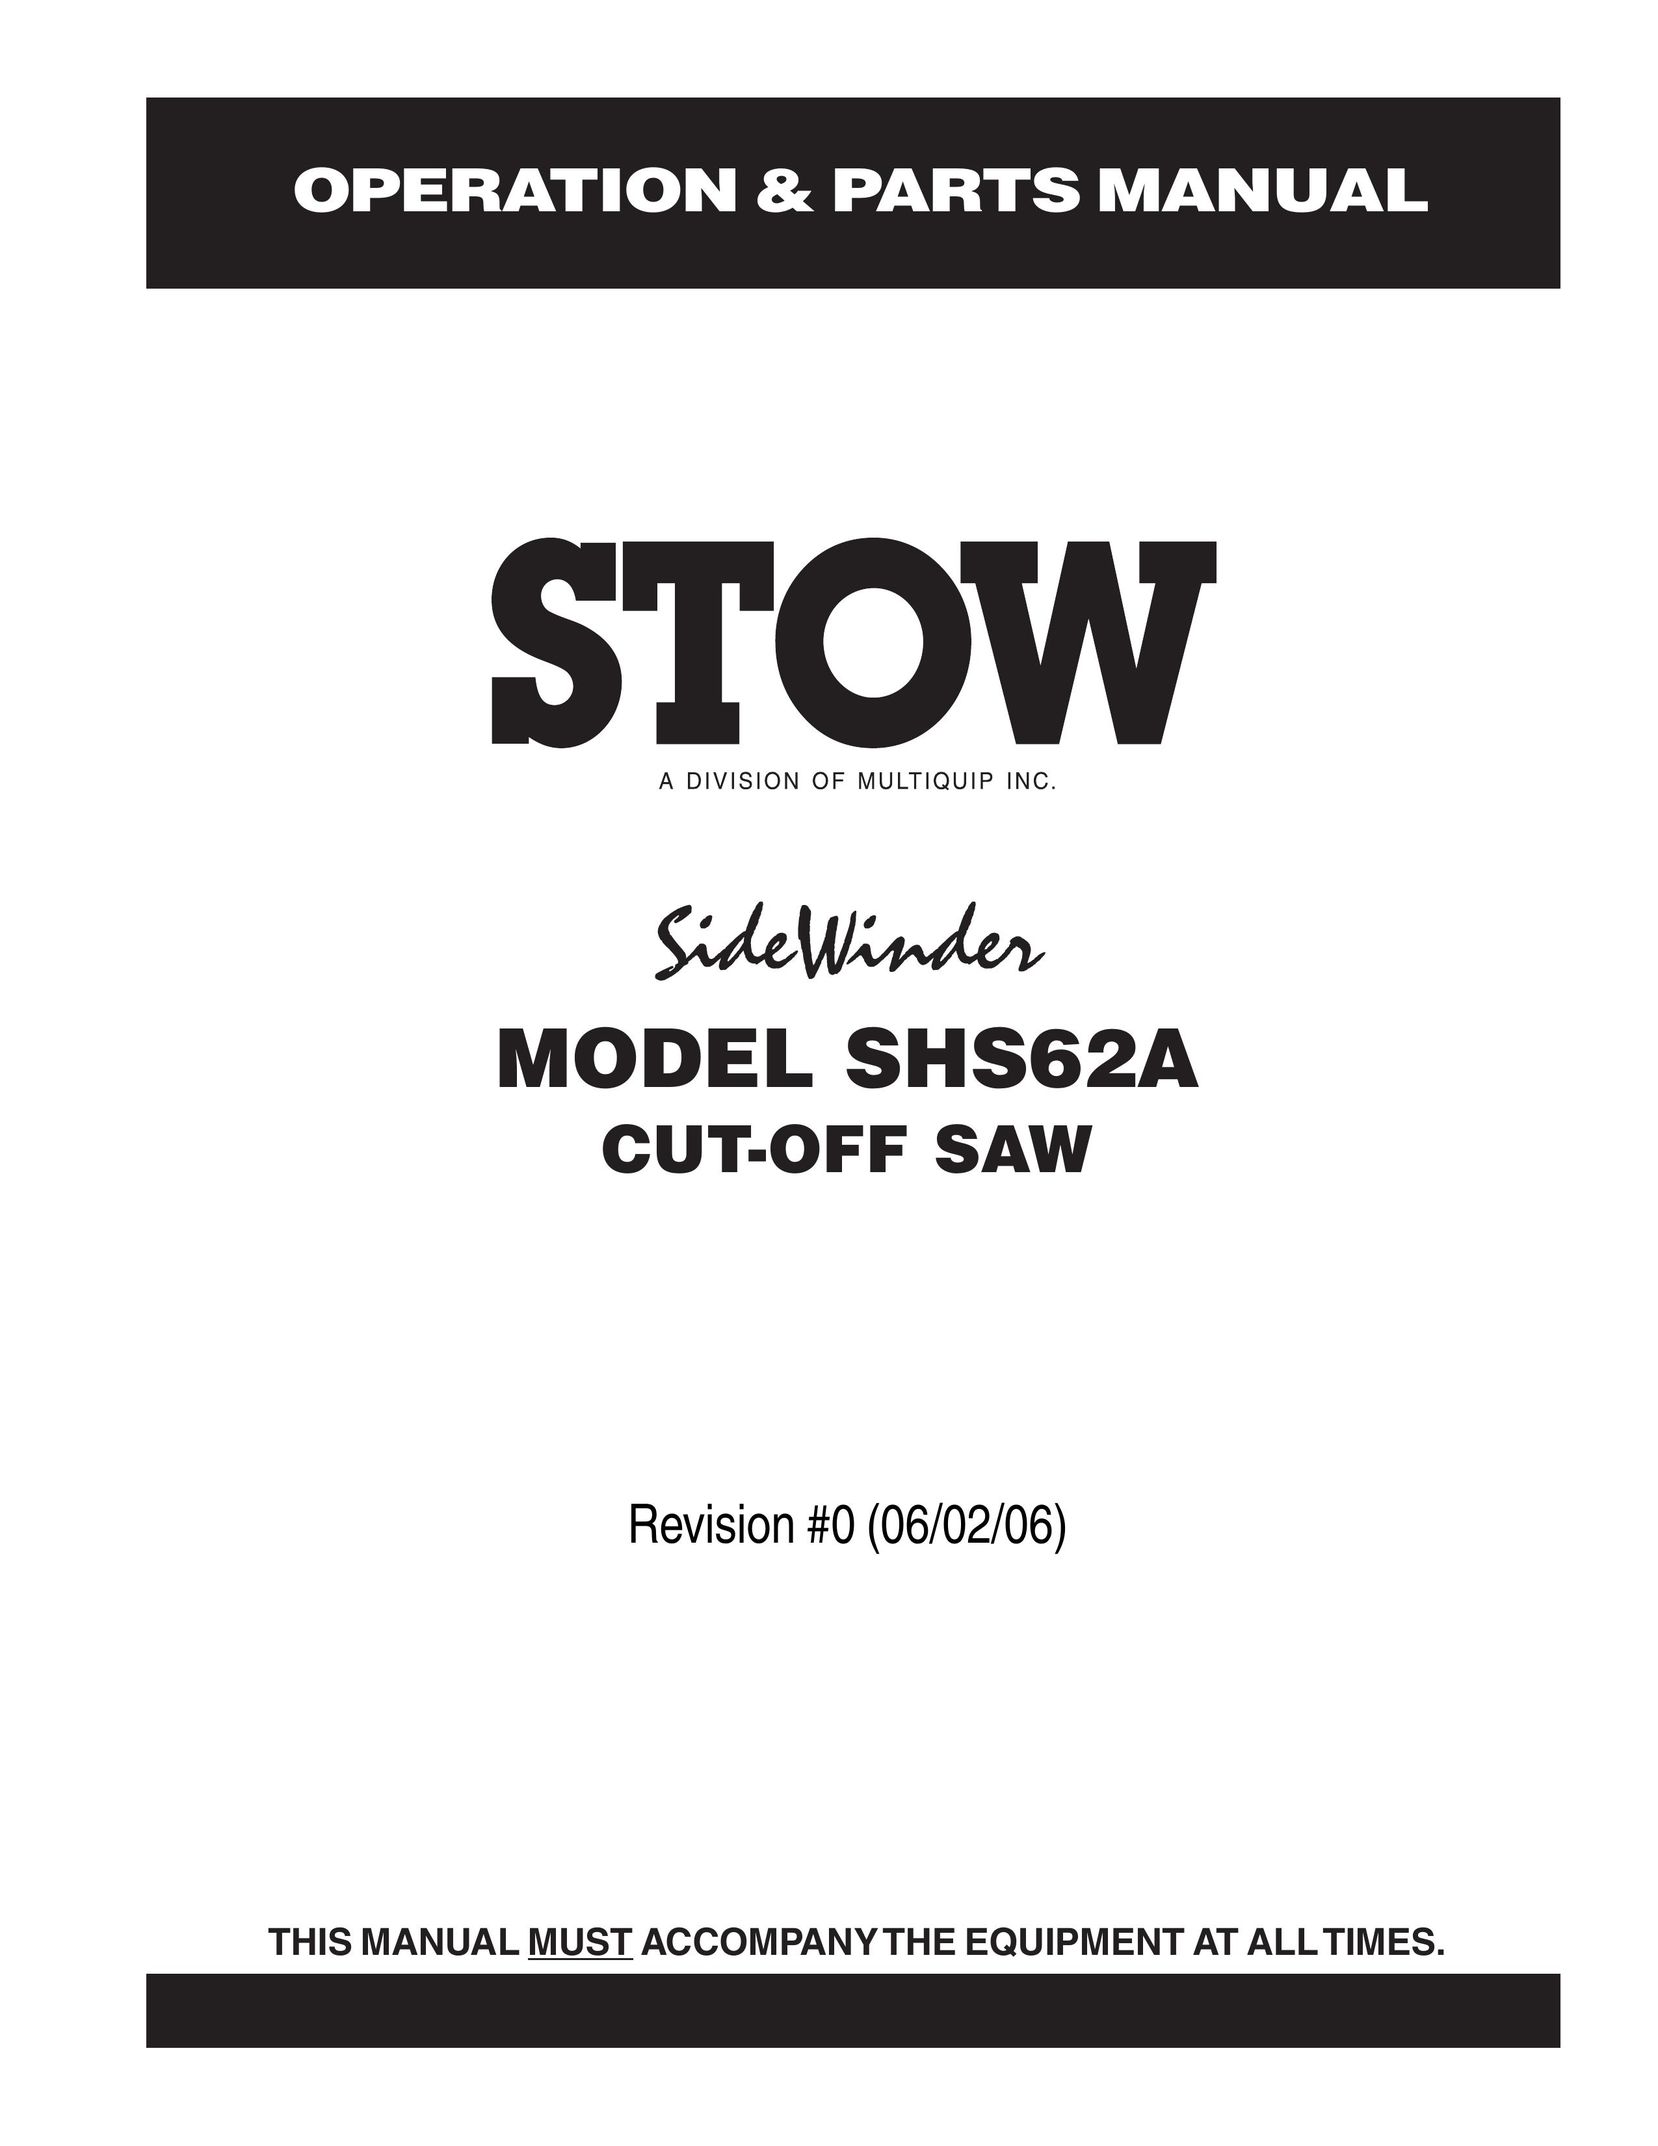 Stow SHS62A Saw User Manual